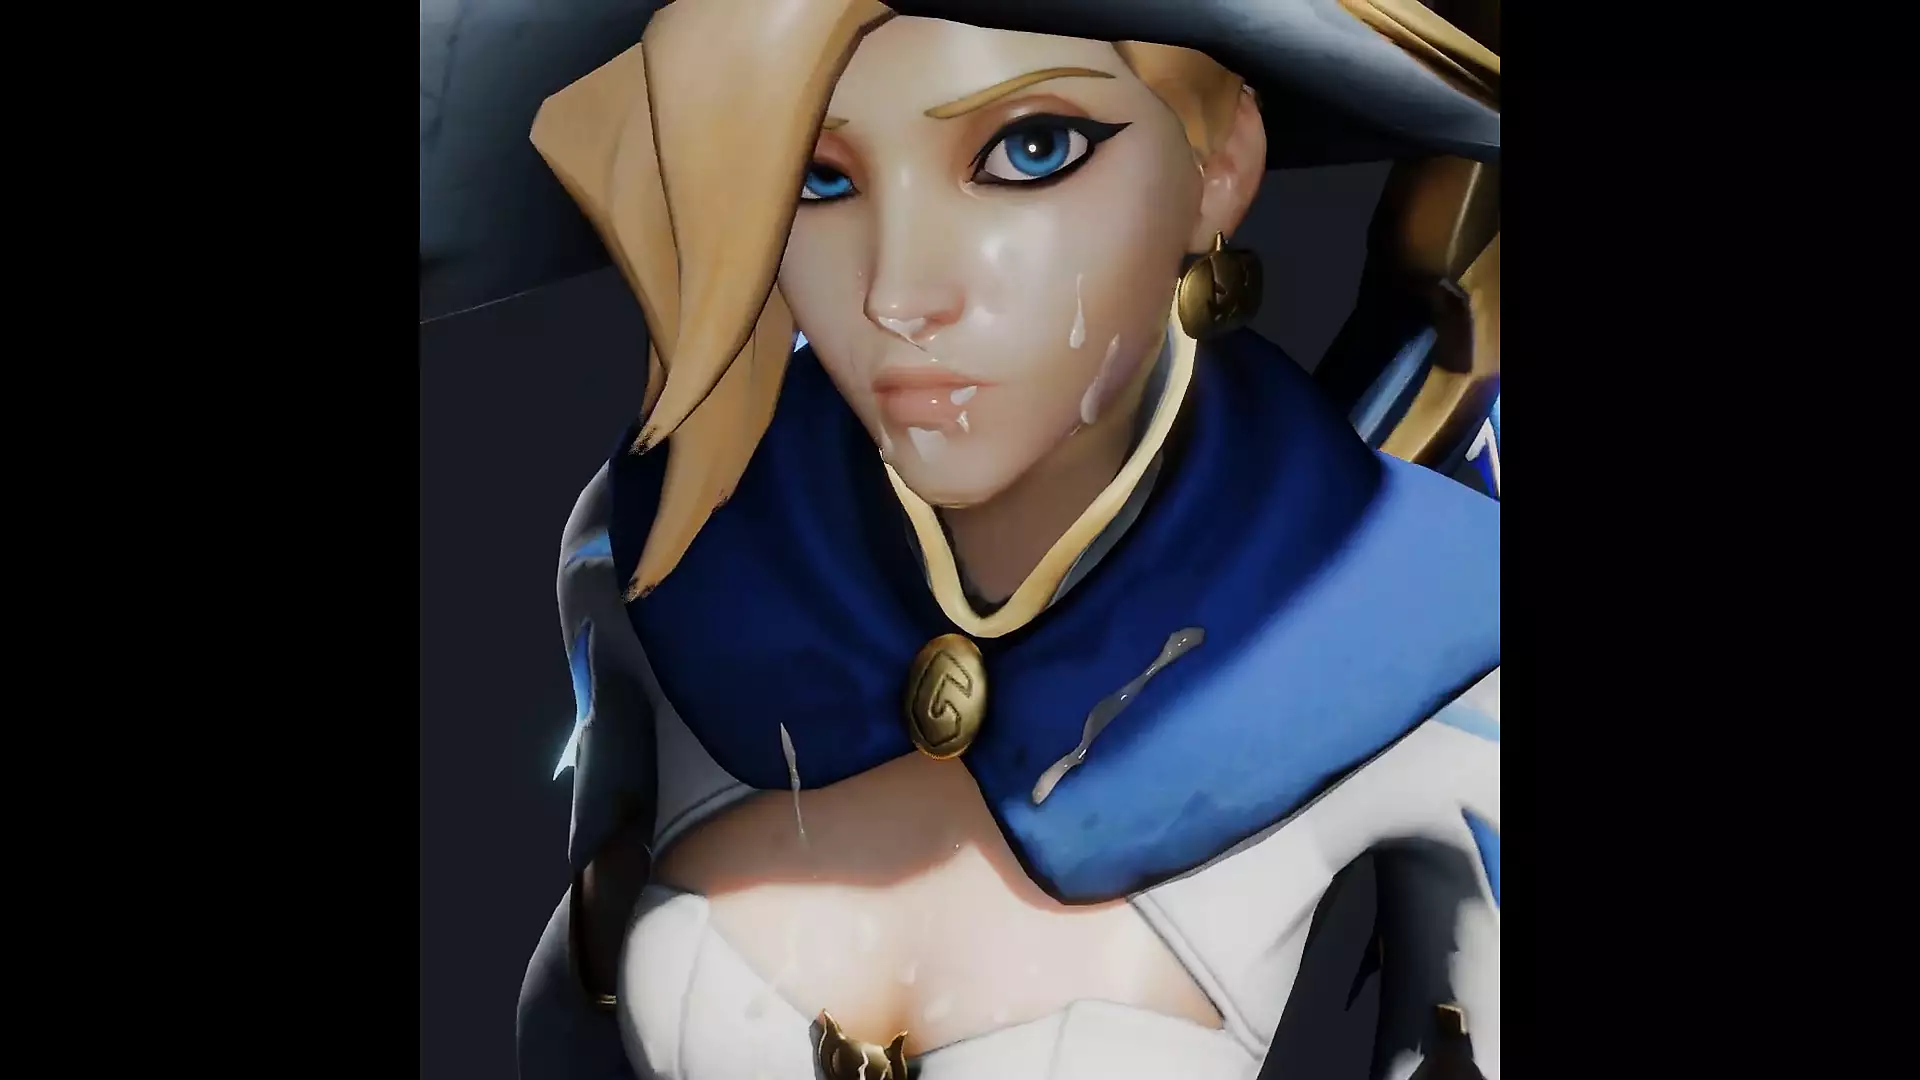 Overwatch Porn 3D Animation Compilation 112: Free Porn ea